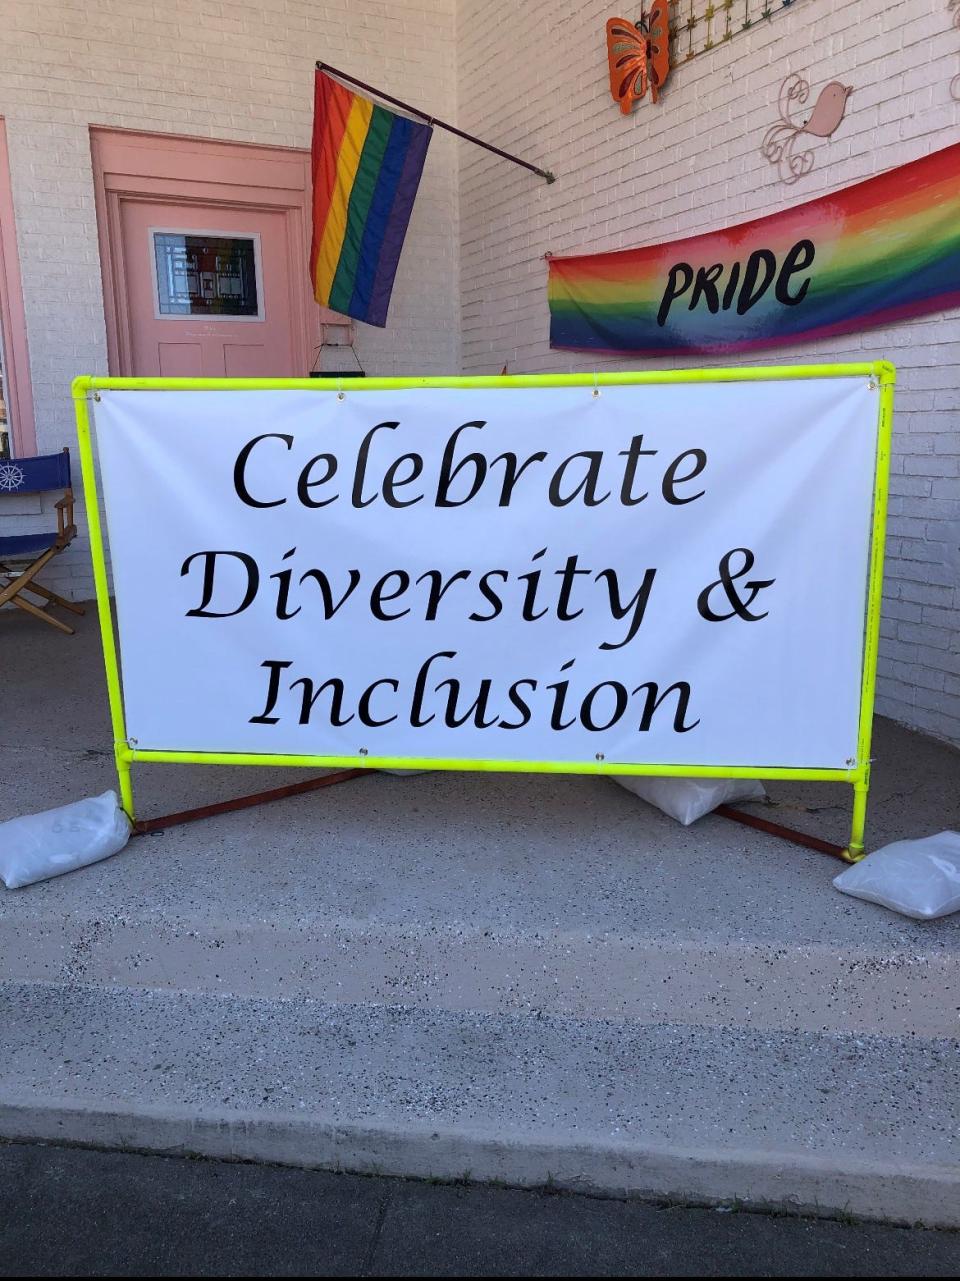 Tracy and Tim Brown-Salsman designed and donated this sign to Loogootee, requesting it be placed on a widely seen city-owned land in June. City officials rejected the request.